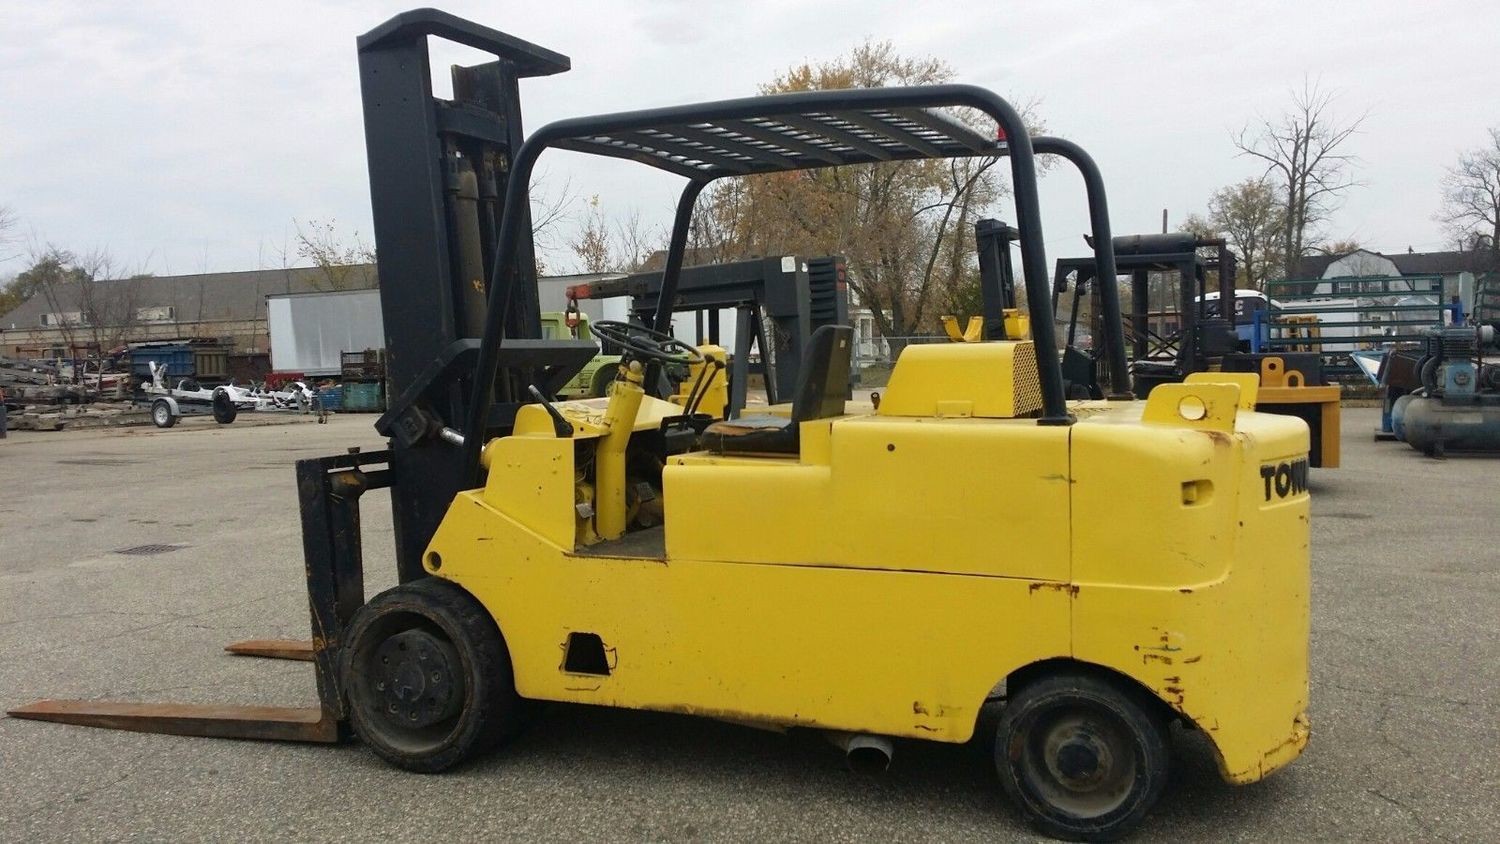 25,000lb CAT/Towmotor Forklift For Sale 12.5 Ton